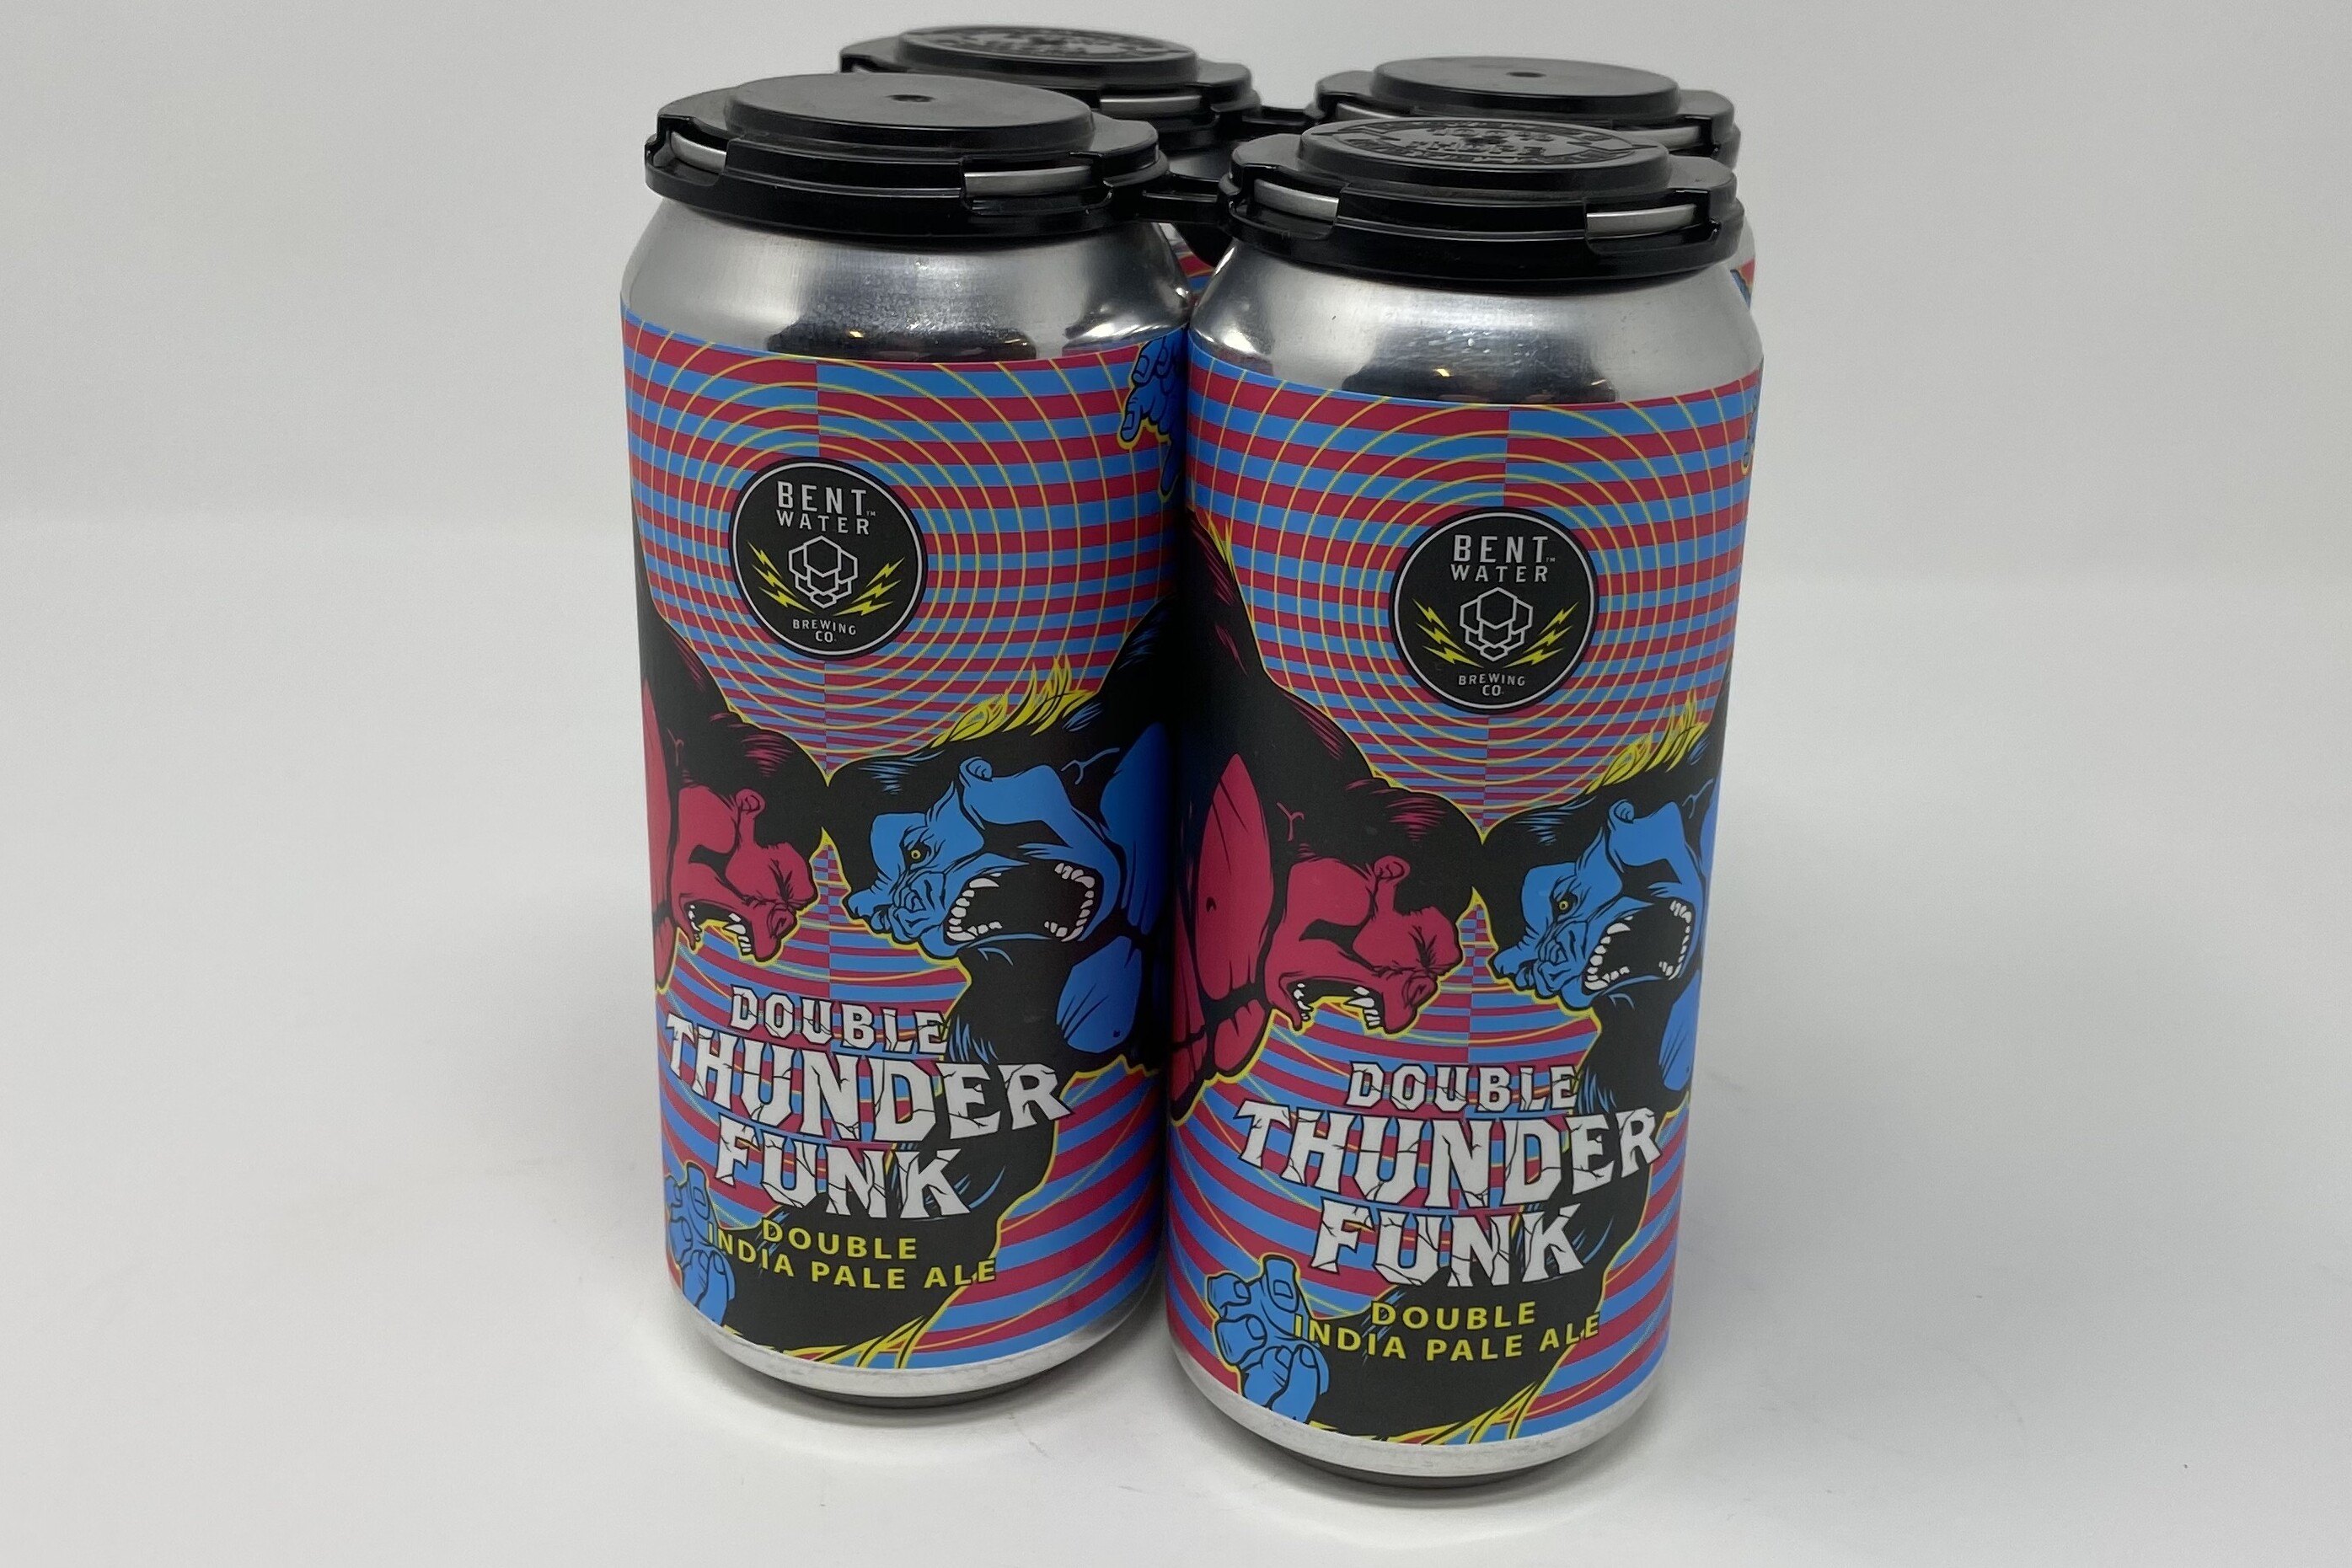 Bent Water Brewing Co., Double Thunder Funk Double India Pale Ale